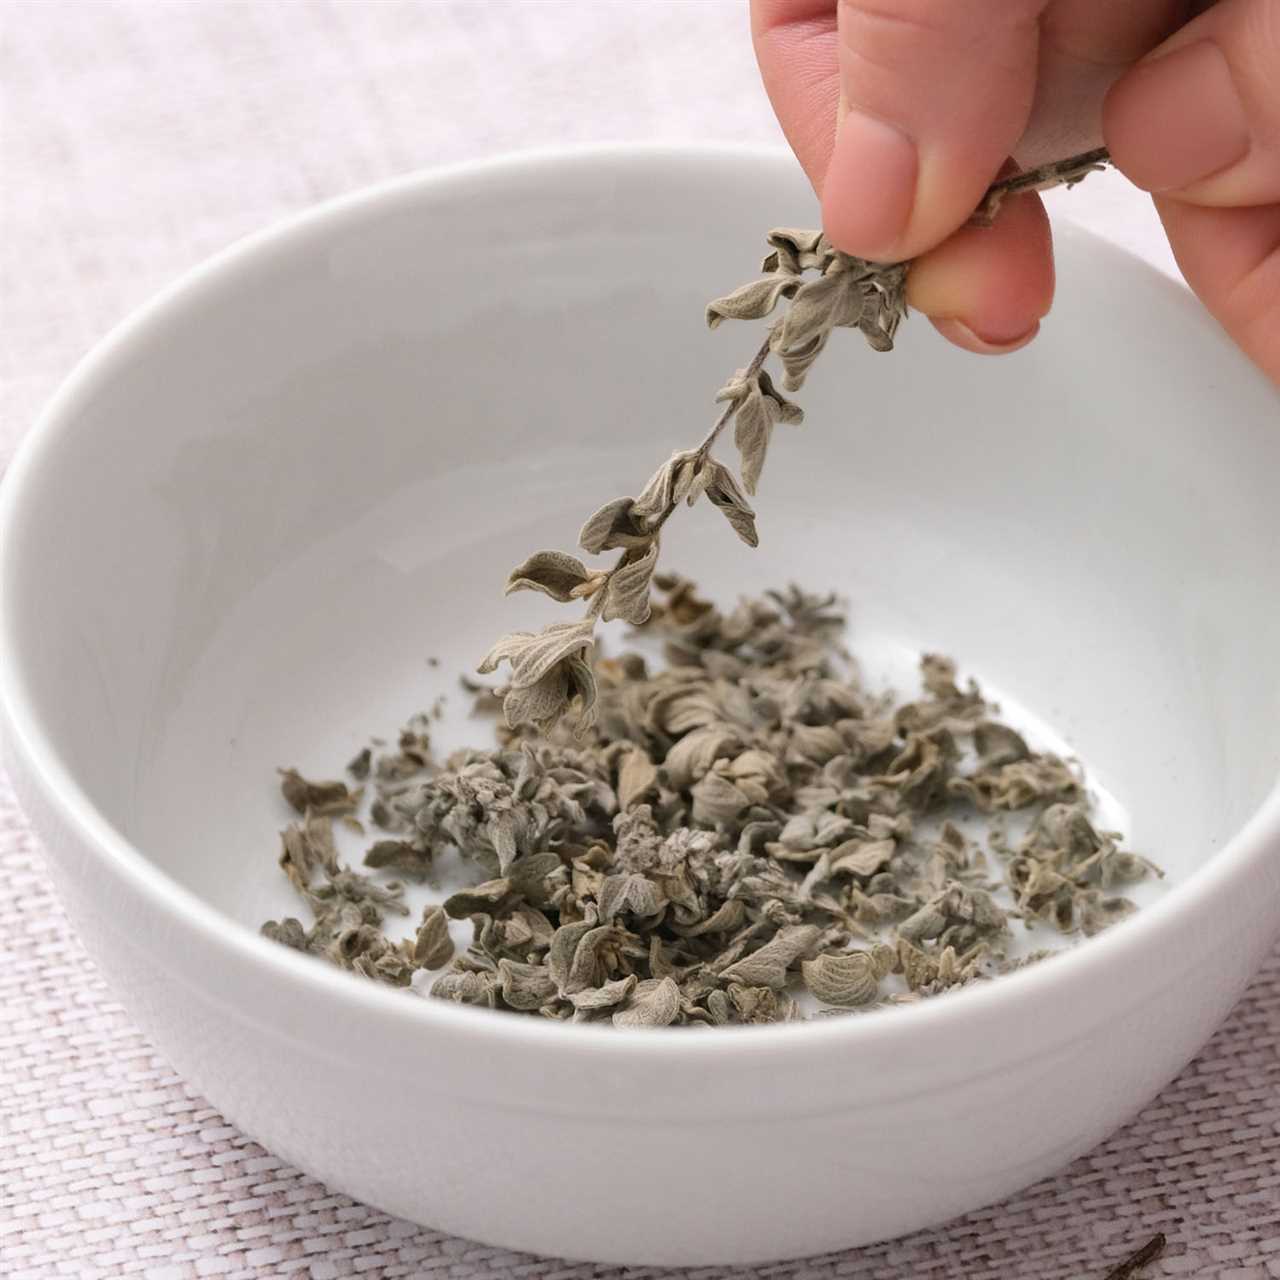 Dry Oregano The Ultimate Guide to Using and Storing